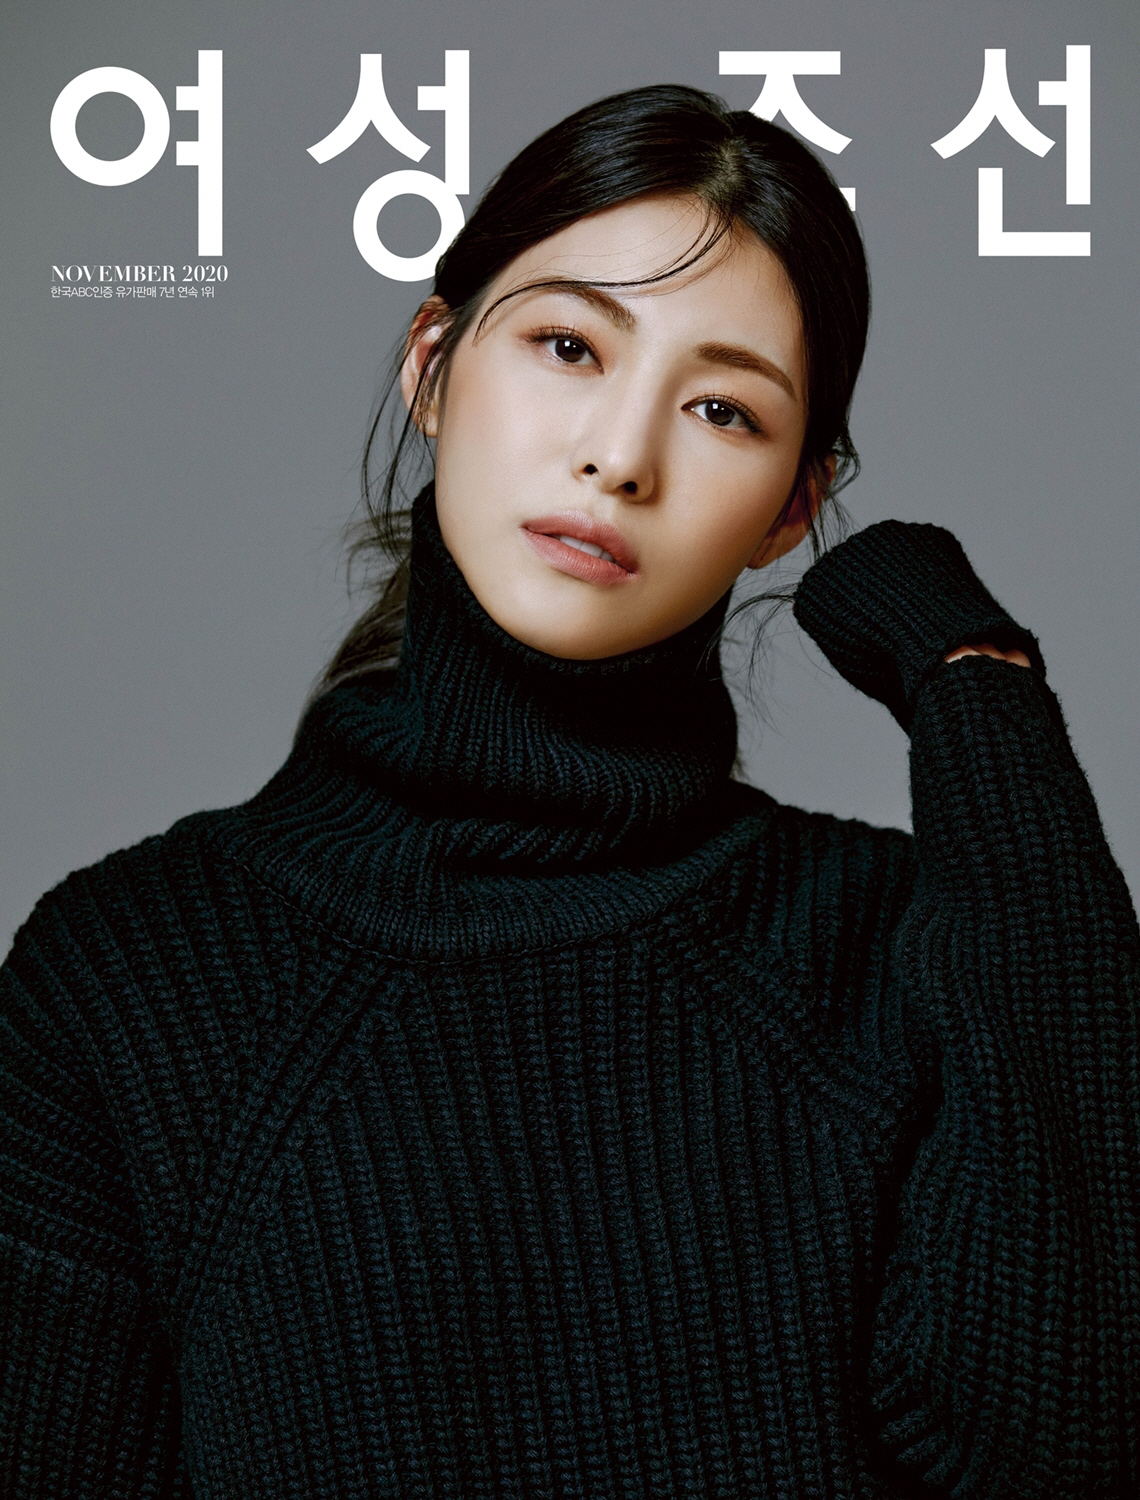 Actor Kim Jung-hwa accessorised the womens paper cover with an elegant and chic charm.On the 27th, Salt Entertainment, a subsidiary company, released several pictures of Kim Jung-hwas November issue with the womens magazine Chosun Broadcasting Company.Kim Jung-hwa in the public photo is wearing a black knit turtleneck and captivating the eye with chic eyes toward the camera.In another photo, you can enjoy your eyes by digesting various bourgeois chic looks such as a leather trench coat, a velvet jumpsuit, a pleat dress and a leather belt.In an interview after the filming, Kim Jung-hwa mentioned the Agnez Mo he met in 2009 and said, I was just backing Agnez Mo.I graduated from the school with an Actor, and my diploma came to me as a parent. I was so sad. And when asked about the source of harmony, he said, I was unstable in my 20s, and I became marriage to a young Age called thirty, and it was only when I became comfortable.I feel like I have a fence in my life, he said. There are a lot of things to do, but I think it is why I want to enjoy everything. On the other hand, Kim Jung-hwas more pictures and interviews can be found in the November issue of Chosun Broadcasting Company, and the movie Ensemble, which he starred as Hye Young, will be released on November 5th.